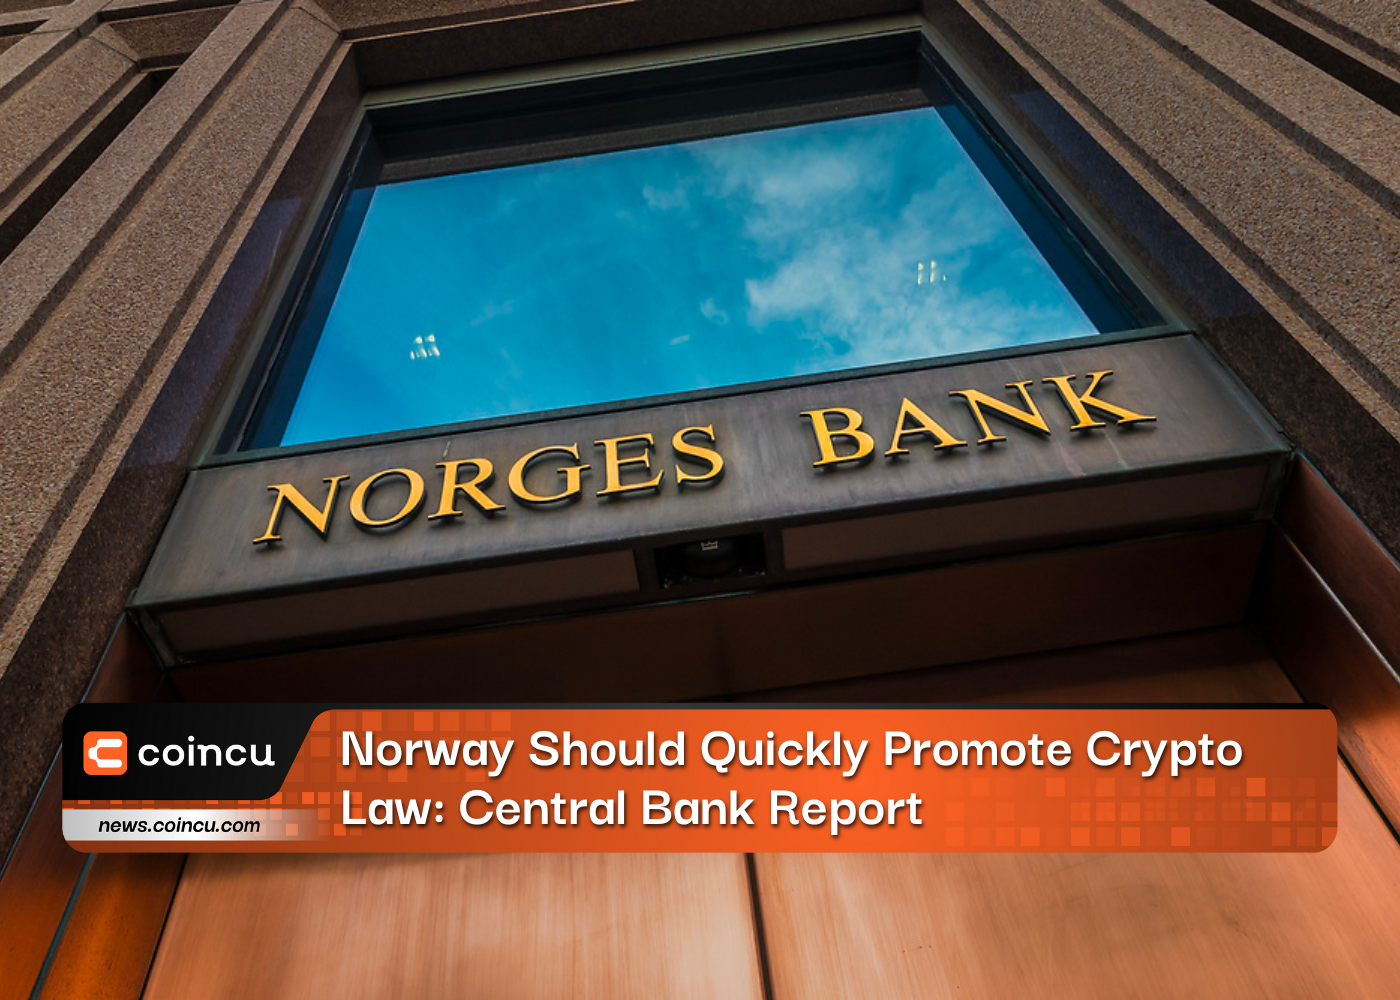 Norway Should Quickly Promote Crypto Law: Central Bank Report